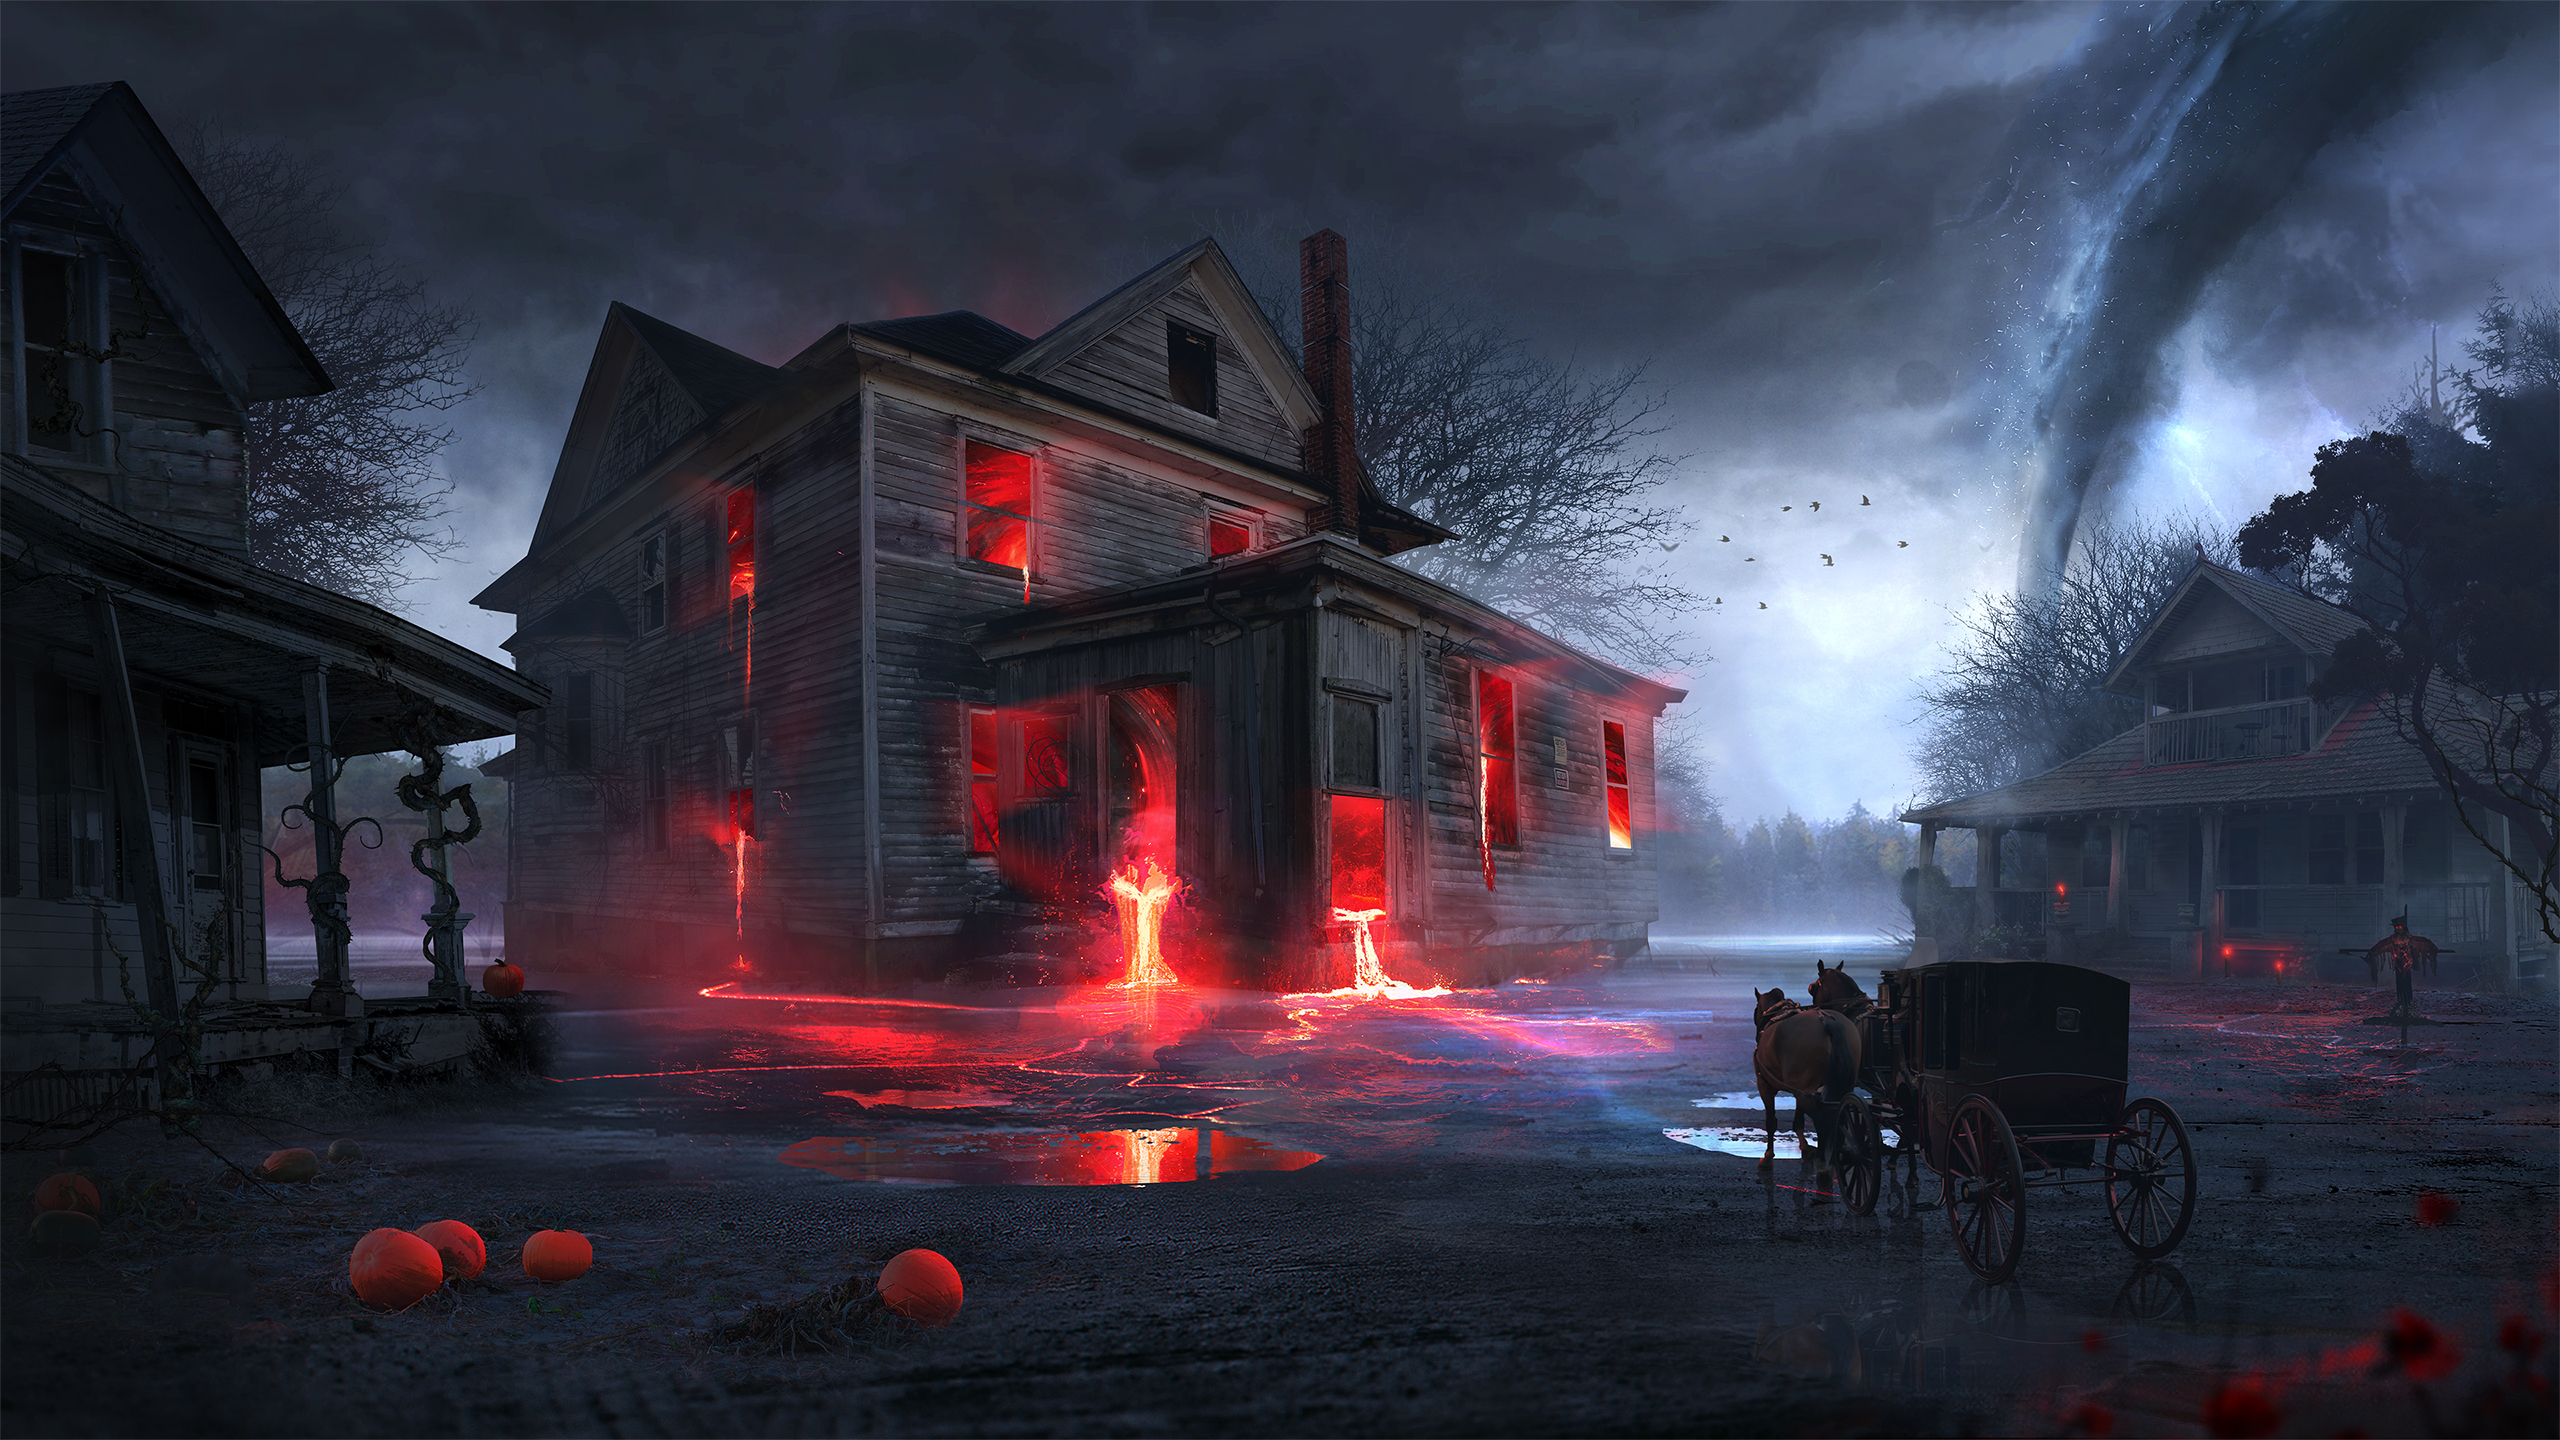 Spooky Halloween House Wallpaper, HD Fantasy 4K Wallpapers, Images and